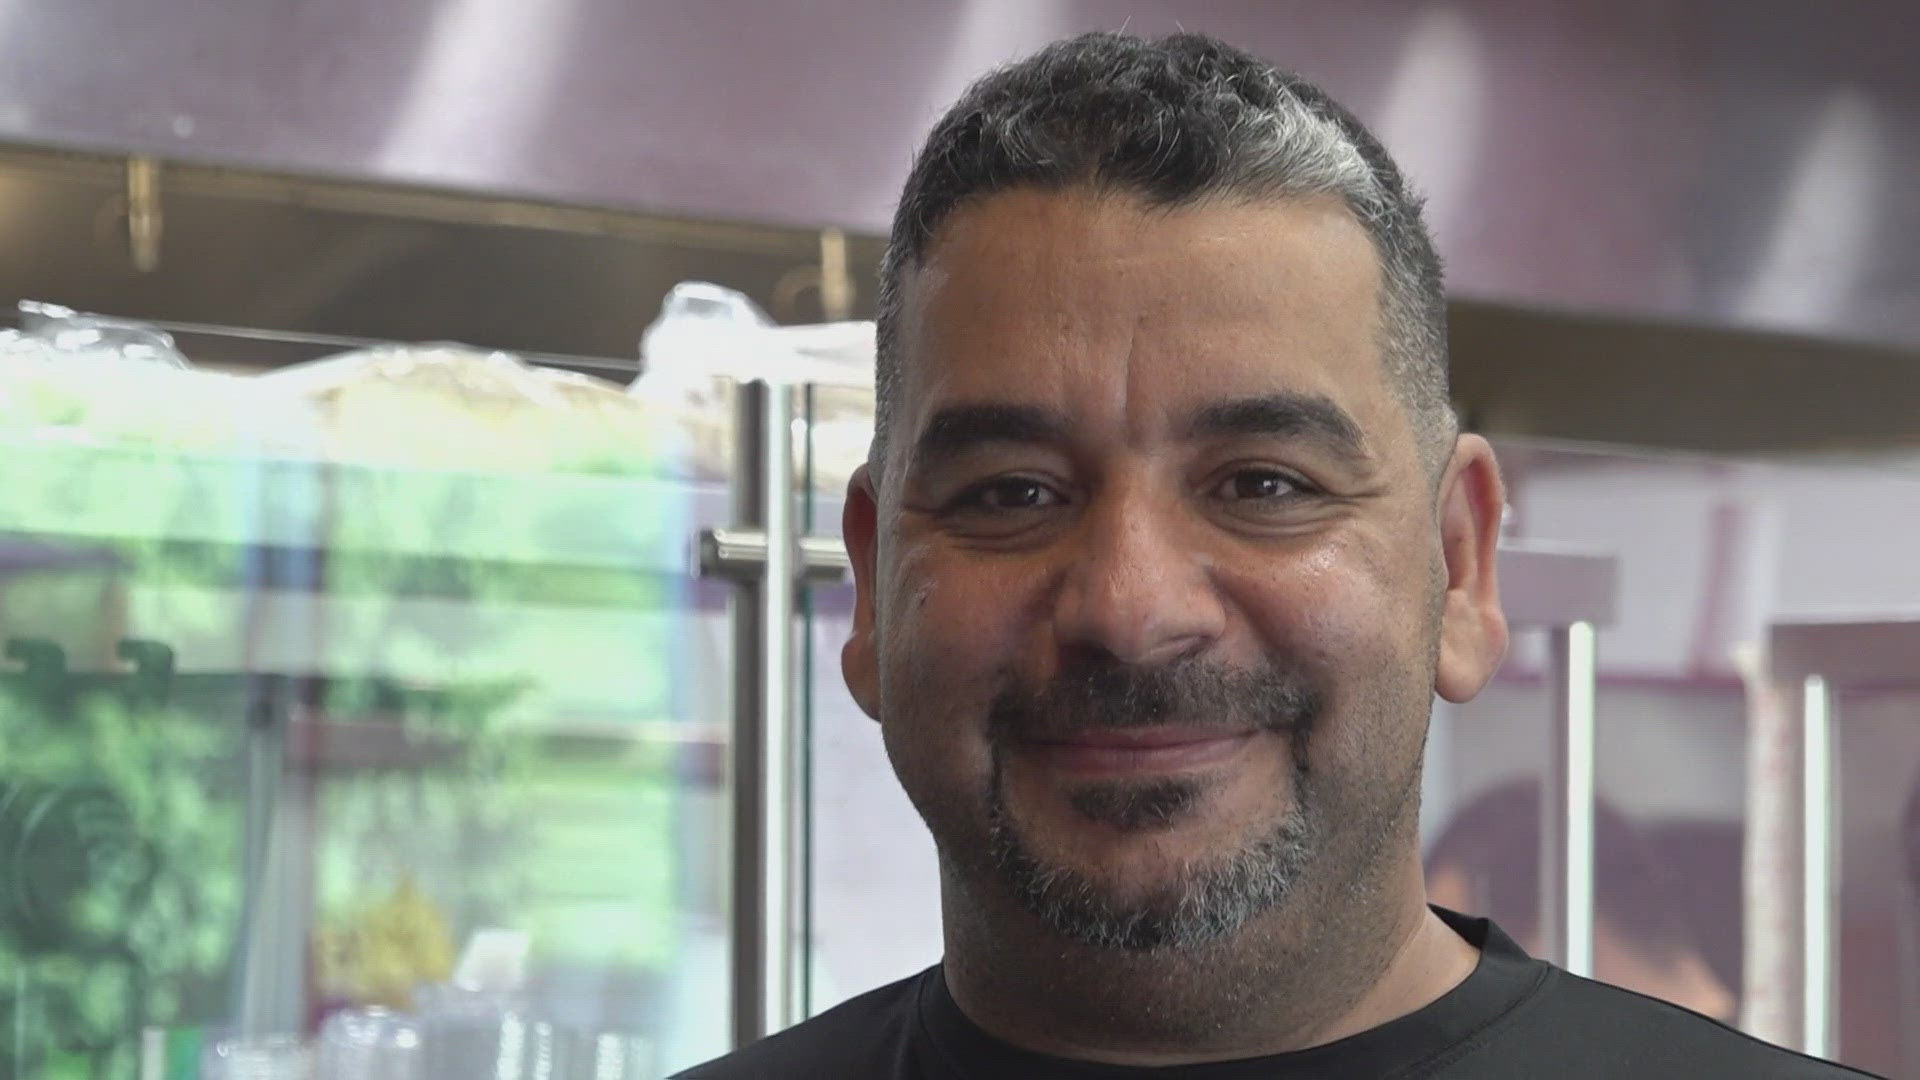 Yassin's Falafel House was once named the Nicest Place in America — a title that reflects the owner's positive and welcoming attitude.